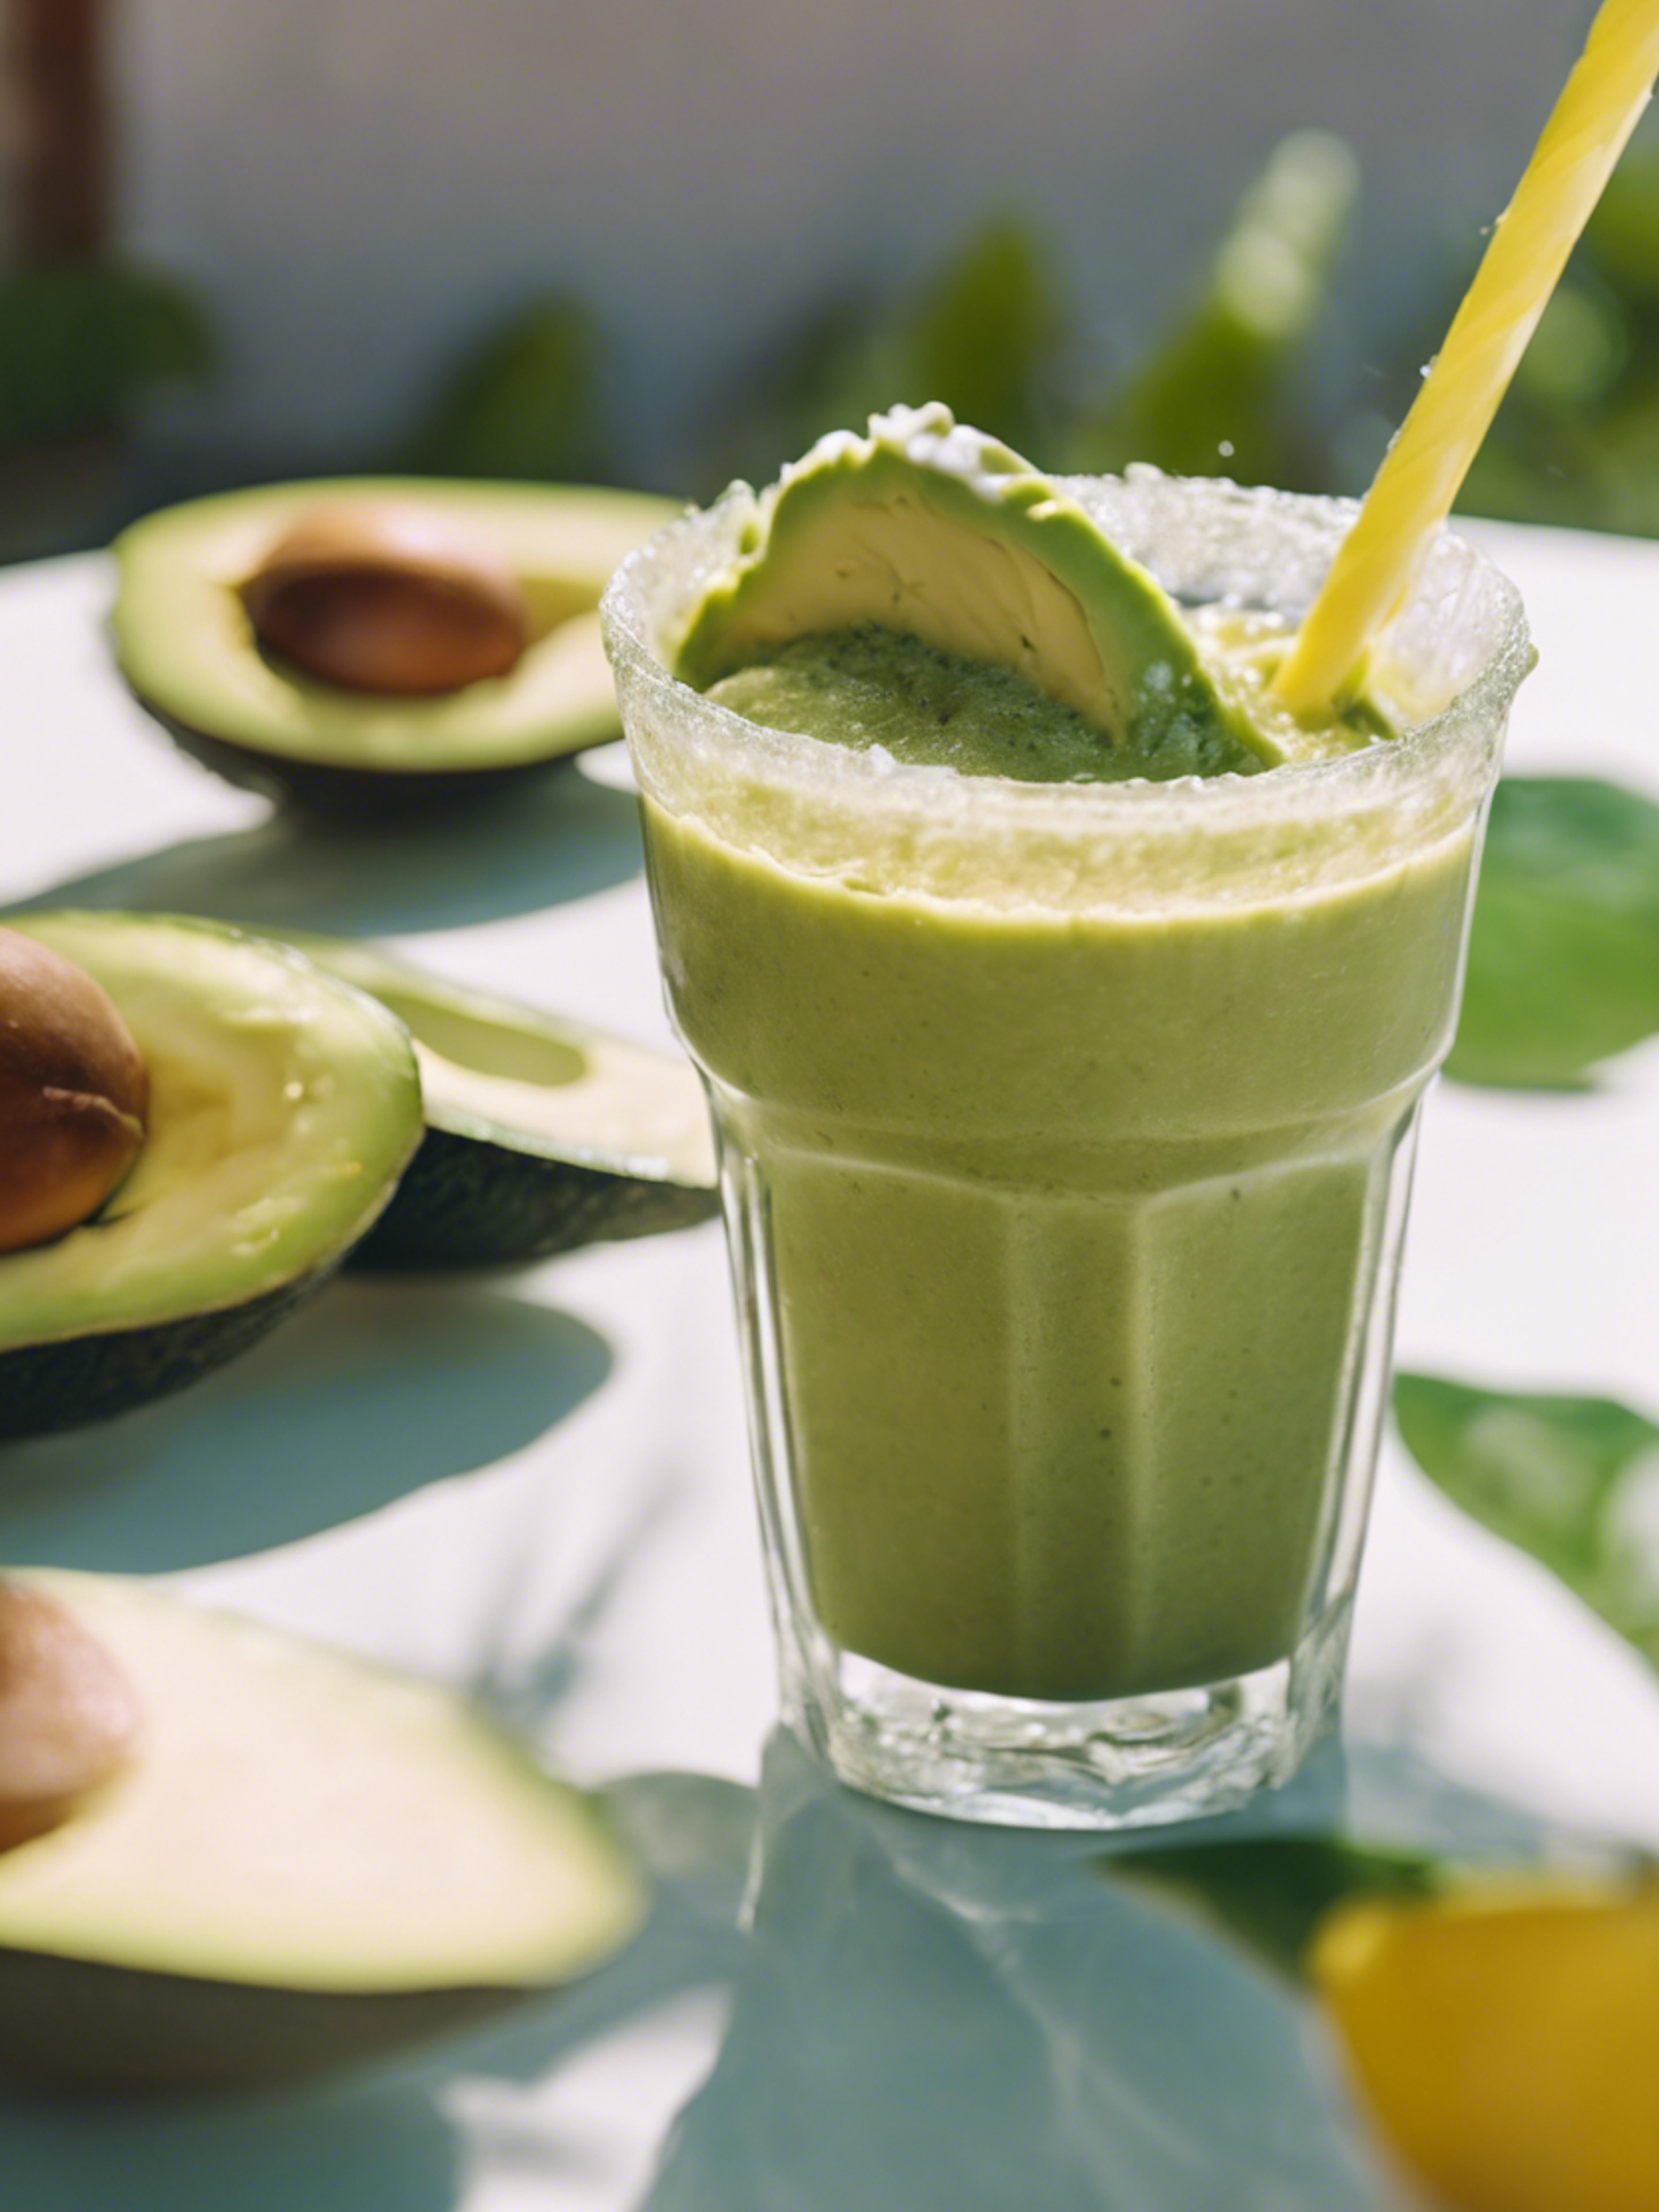 A playful avocado sipping on tropical smoothie on a hot summer day Sfondo[3b128a2f6f1a4fb38d08]